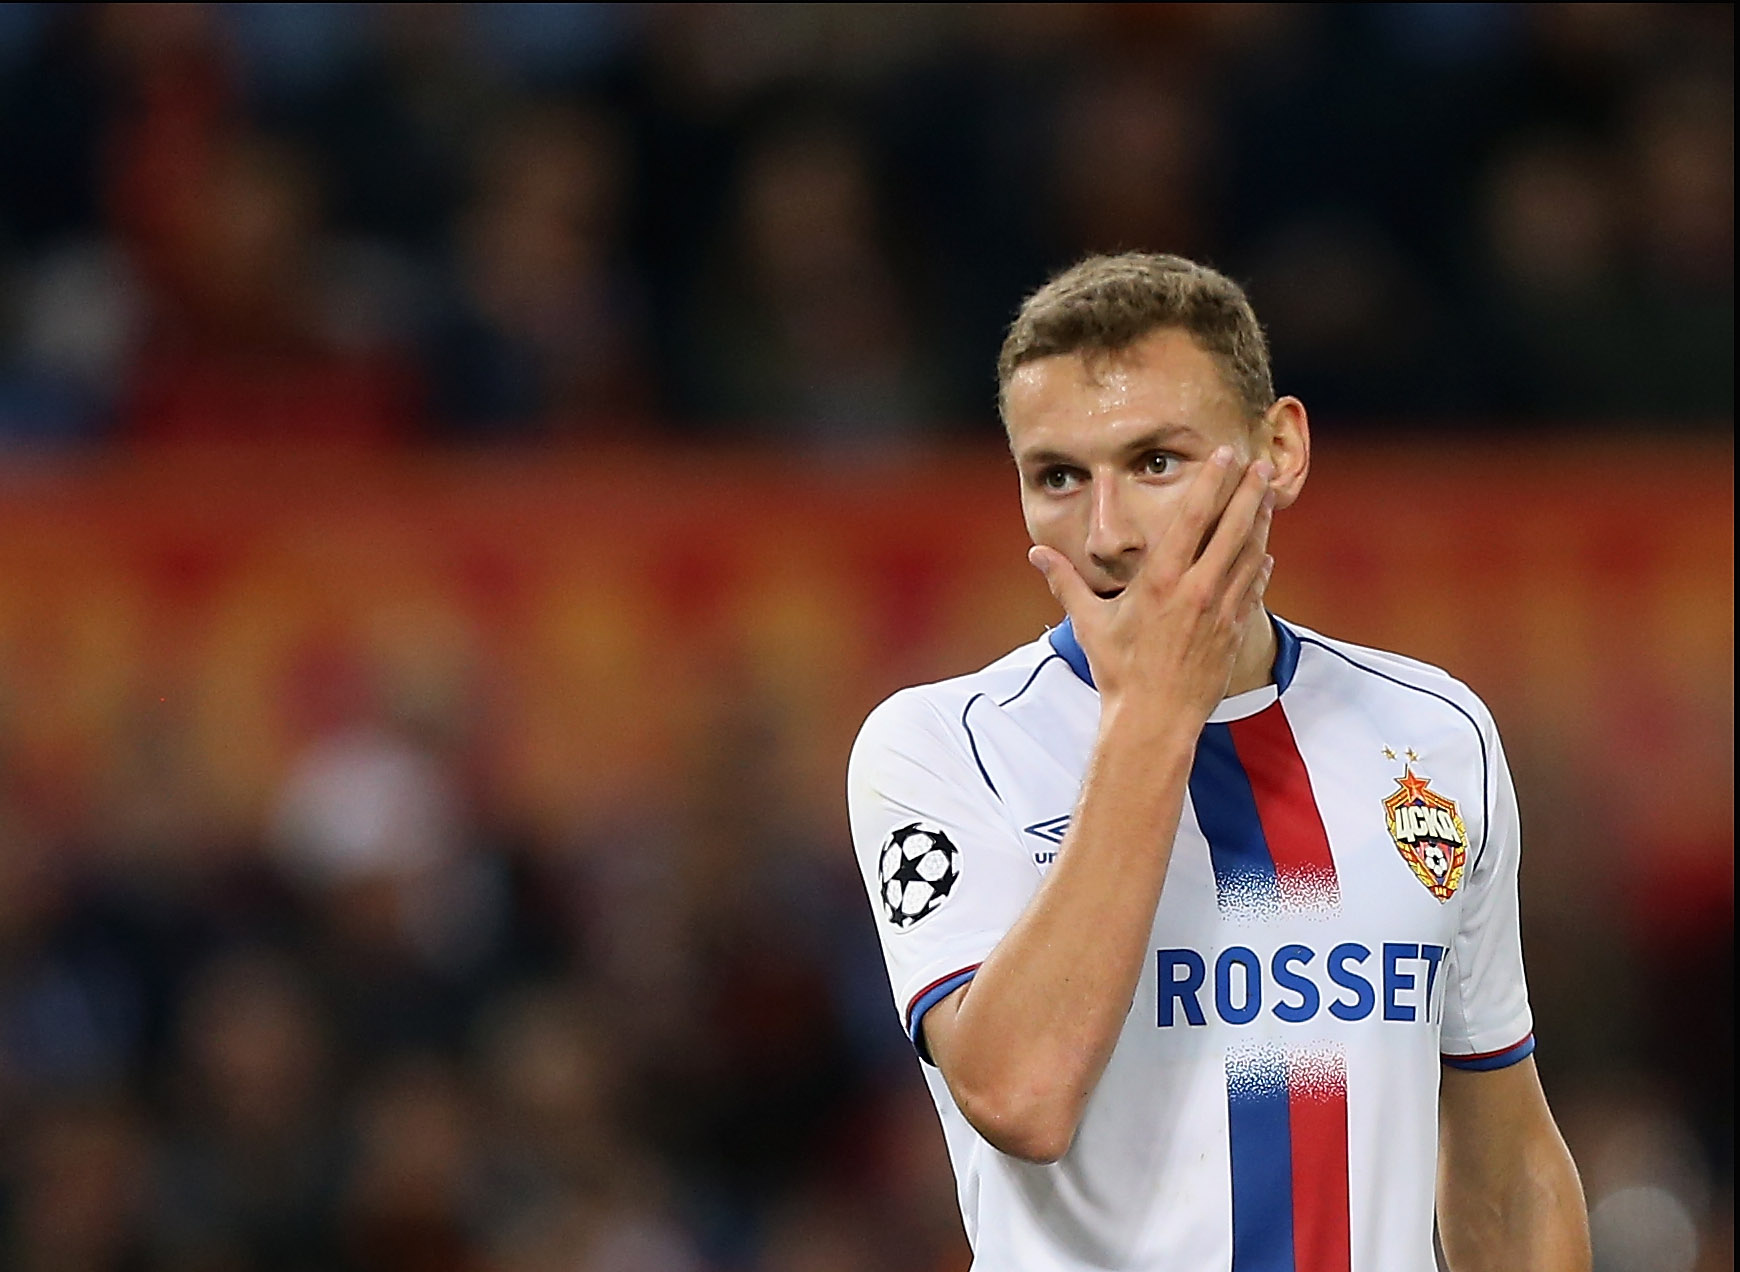 CSKA Moscow player Fedor Chalov reacts during the Group G match of the UEFA Champions League between AS Roma and CSKA Moscow at Stadio Olimpico. (Getty Images)